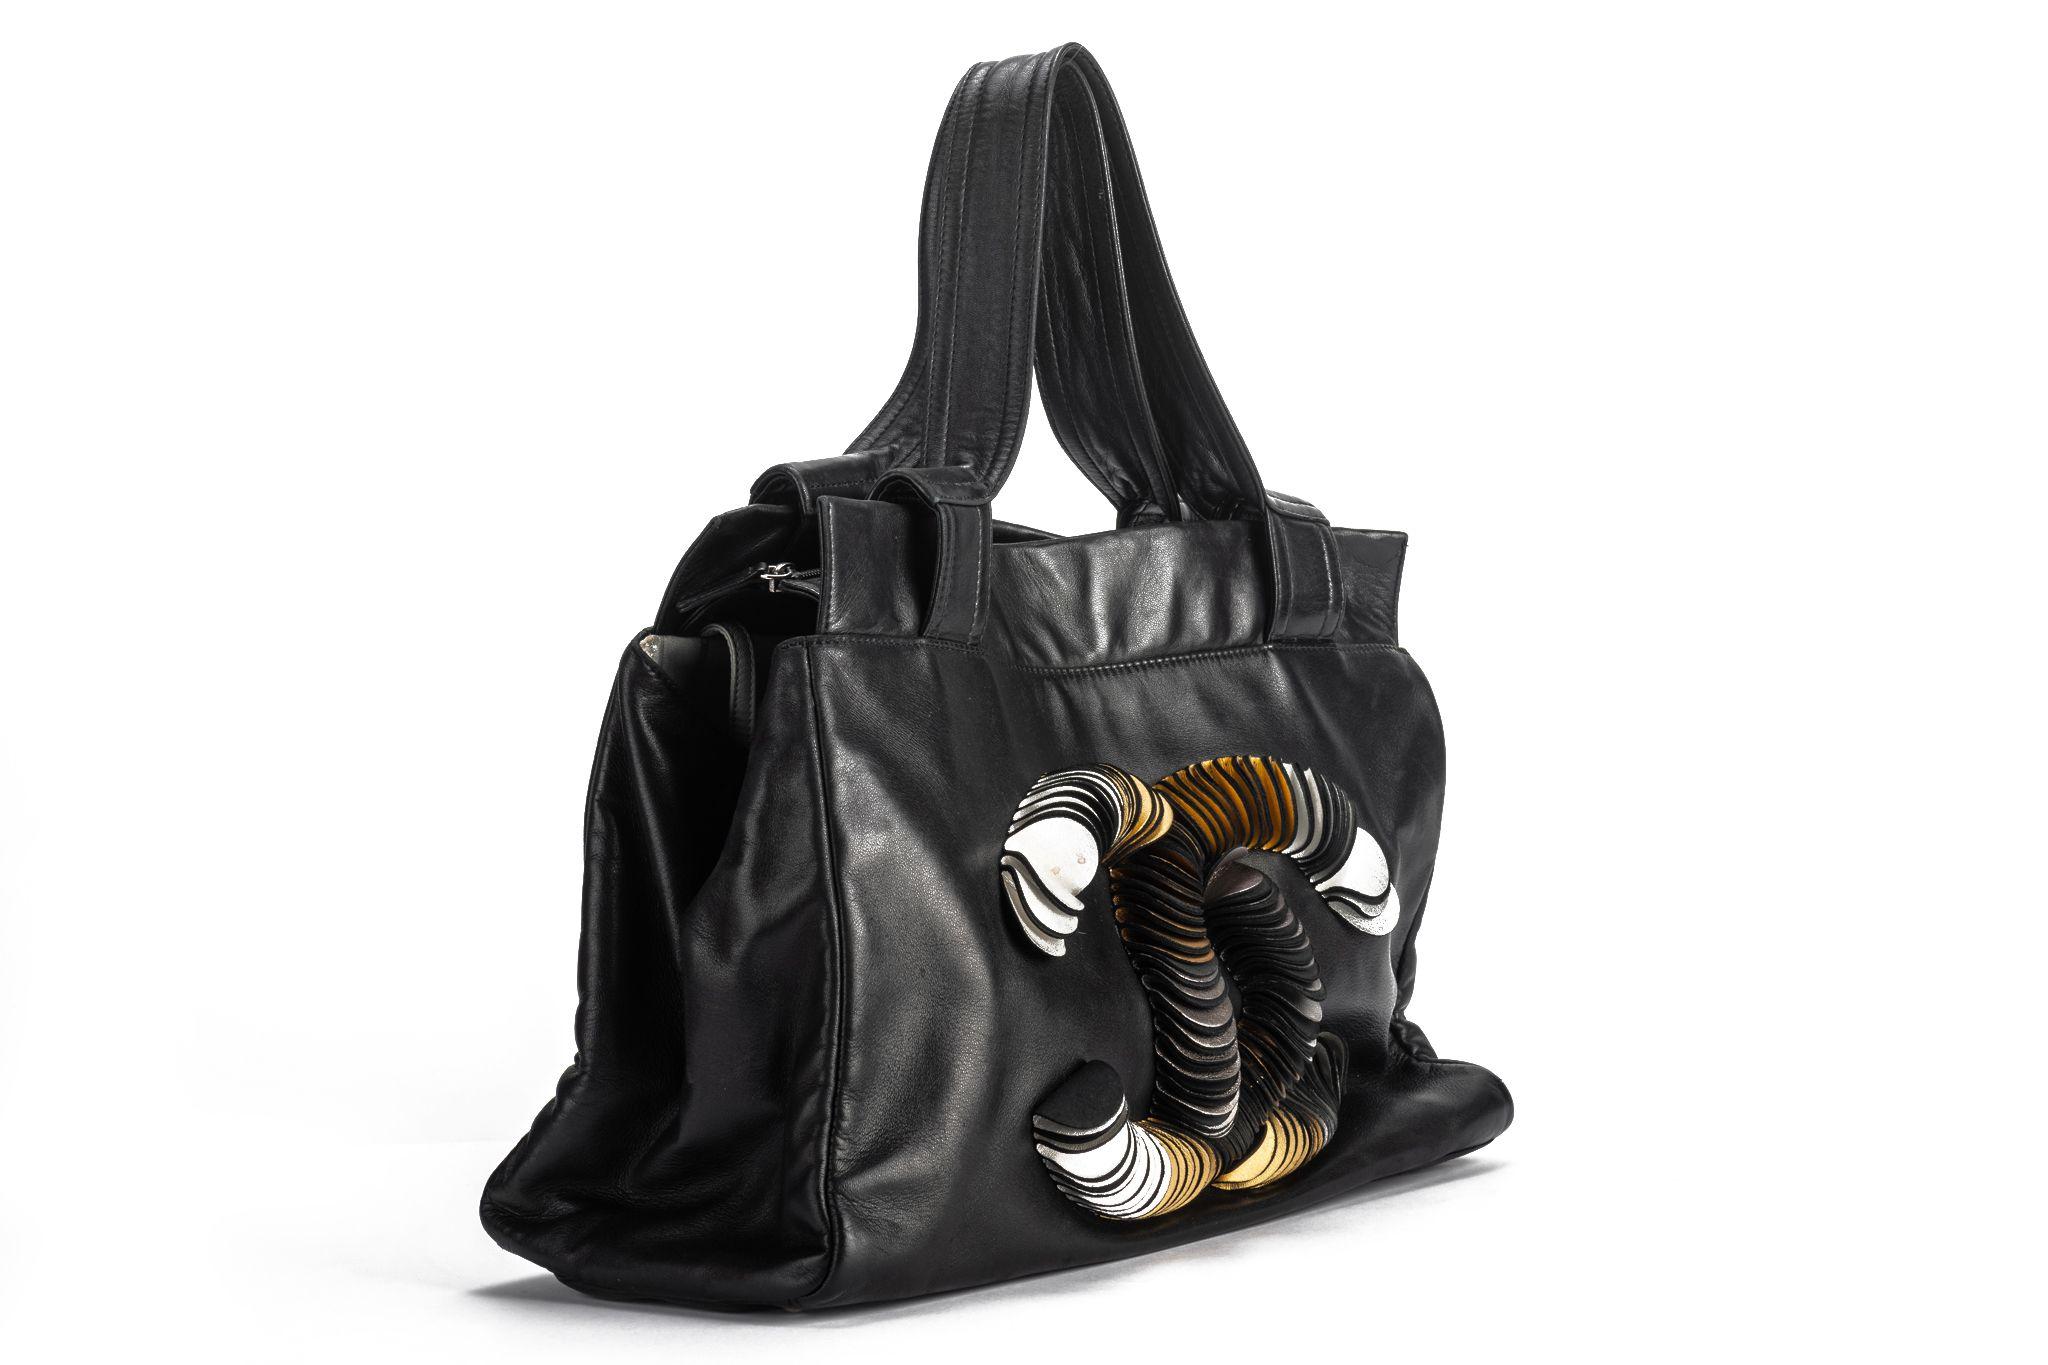 Chanel black Lambskin shoulder tote with gold discs from logo design. Shoulder drop 7”. Collection 12. Comes with hologram and original dust cover.